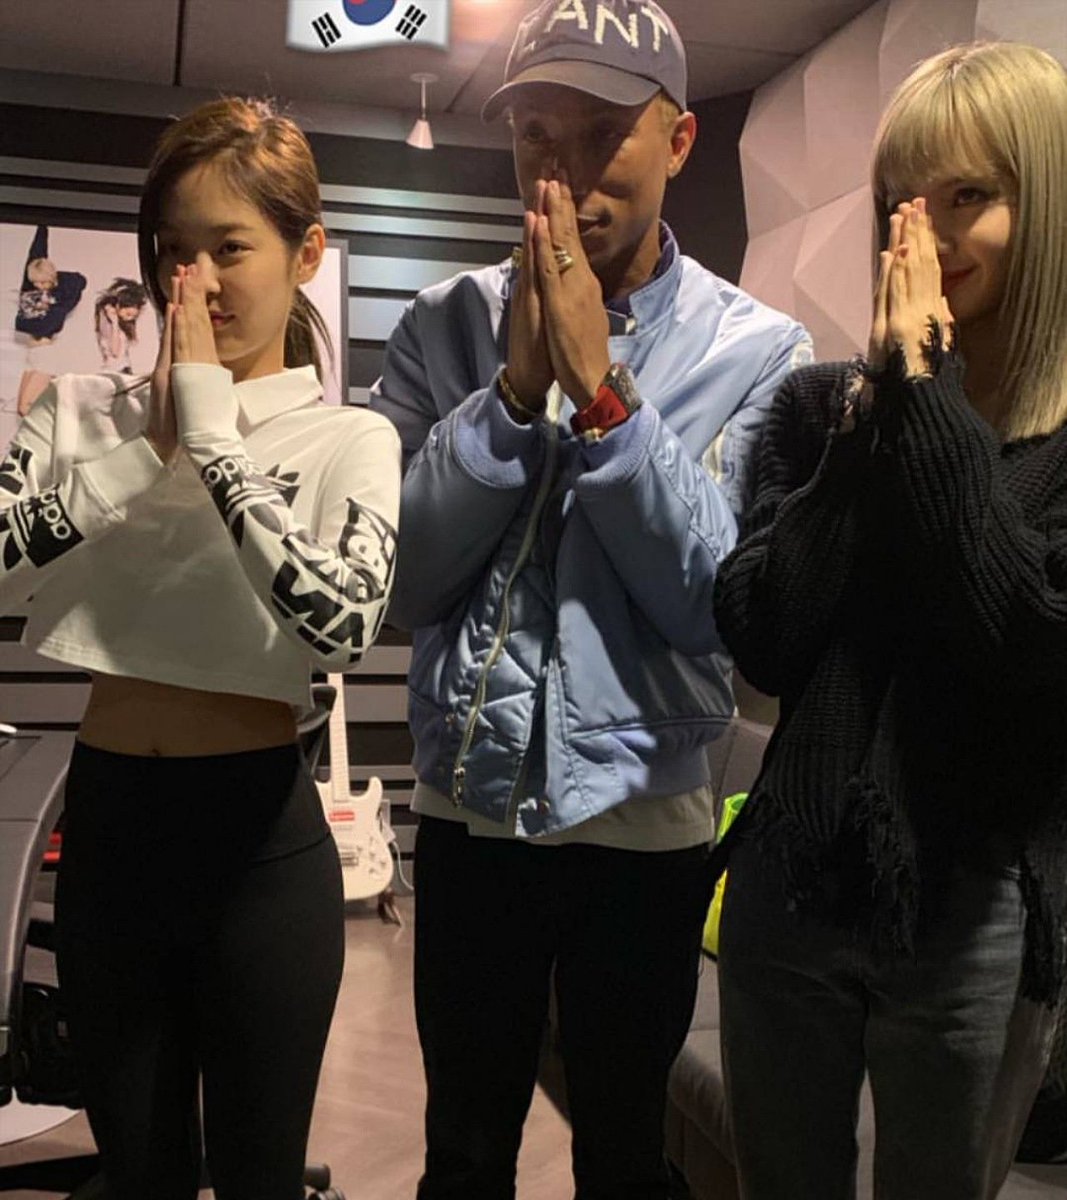 While he was in Korea for his Chanel event, Pharrell Williams spent some time in the studio with Jennie and Lisa. Nothing ever came out of it, just another wasted opportunity for new music.